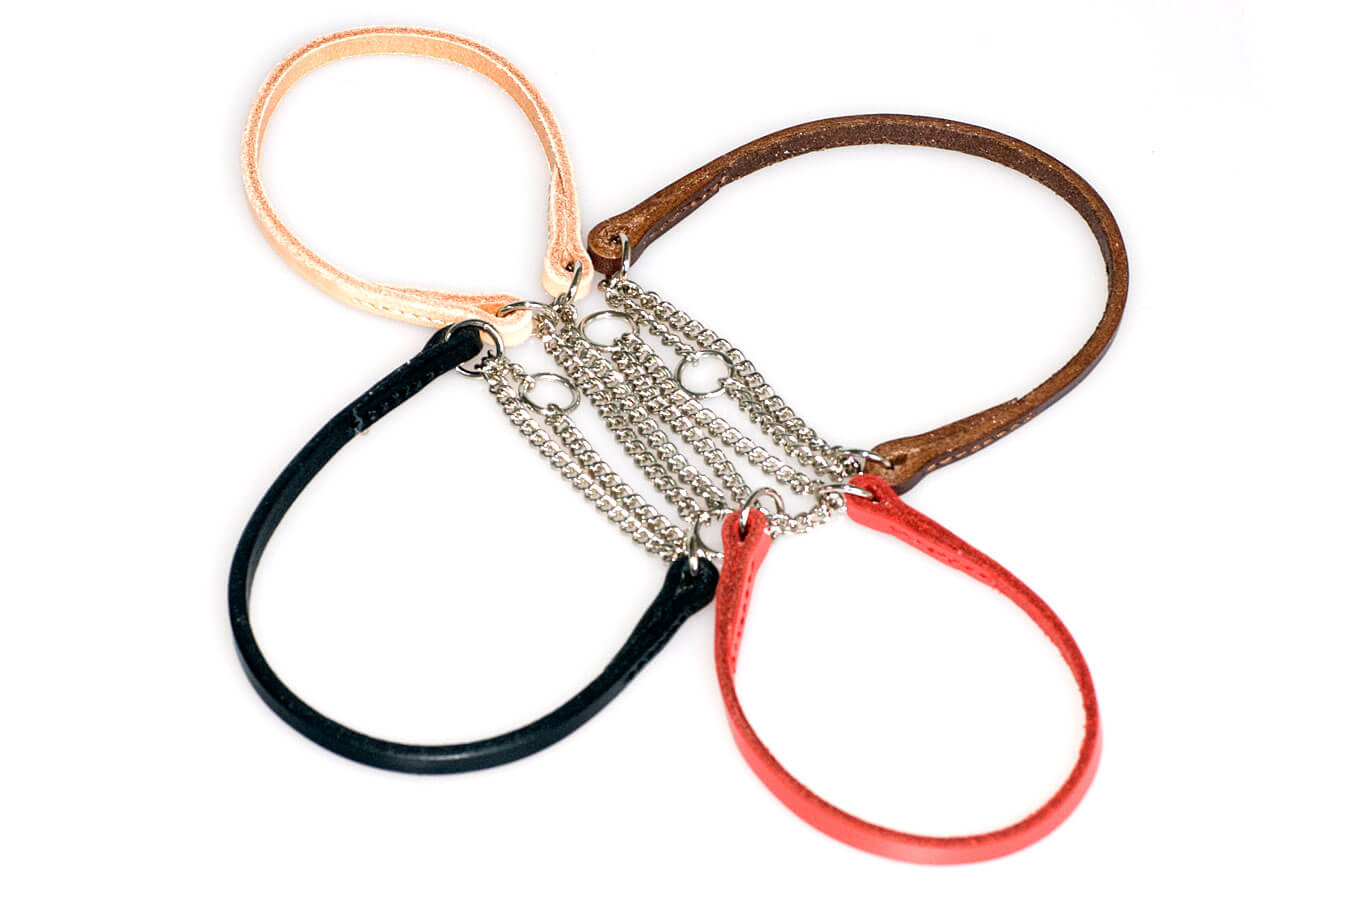 Leather martingale dog show collars are available in 4 colours